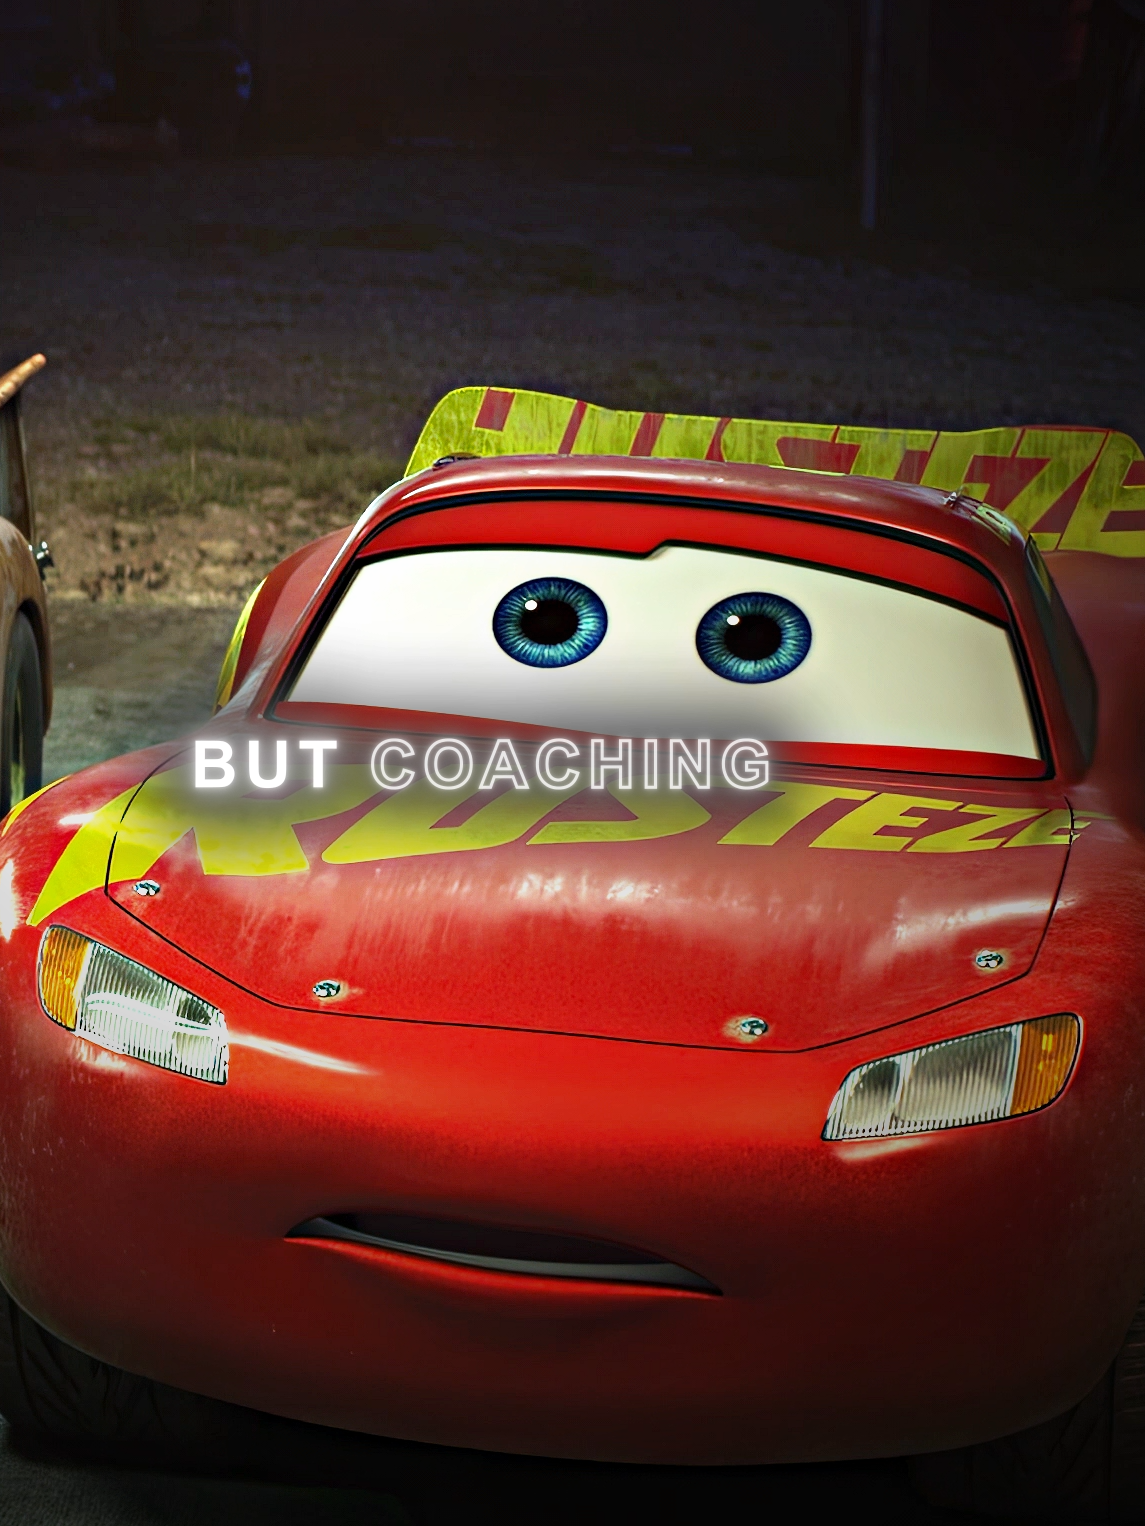 Finally another woodl edit. | The texts is inspired by @95race but the idea is mine | #fyp#foryou #foryoupage #cars #cars3 #lightningmcqueen #lightningmcqueenedit #carsedit #disney #pixar #aftereffects #ae #maxcar95